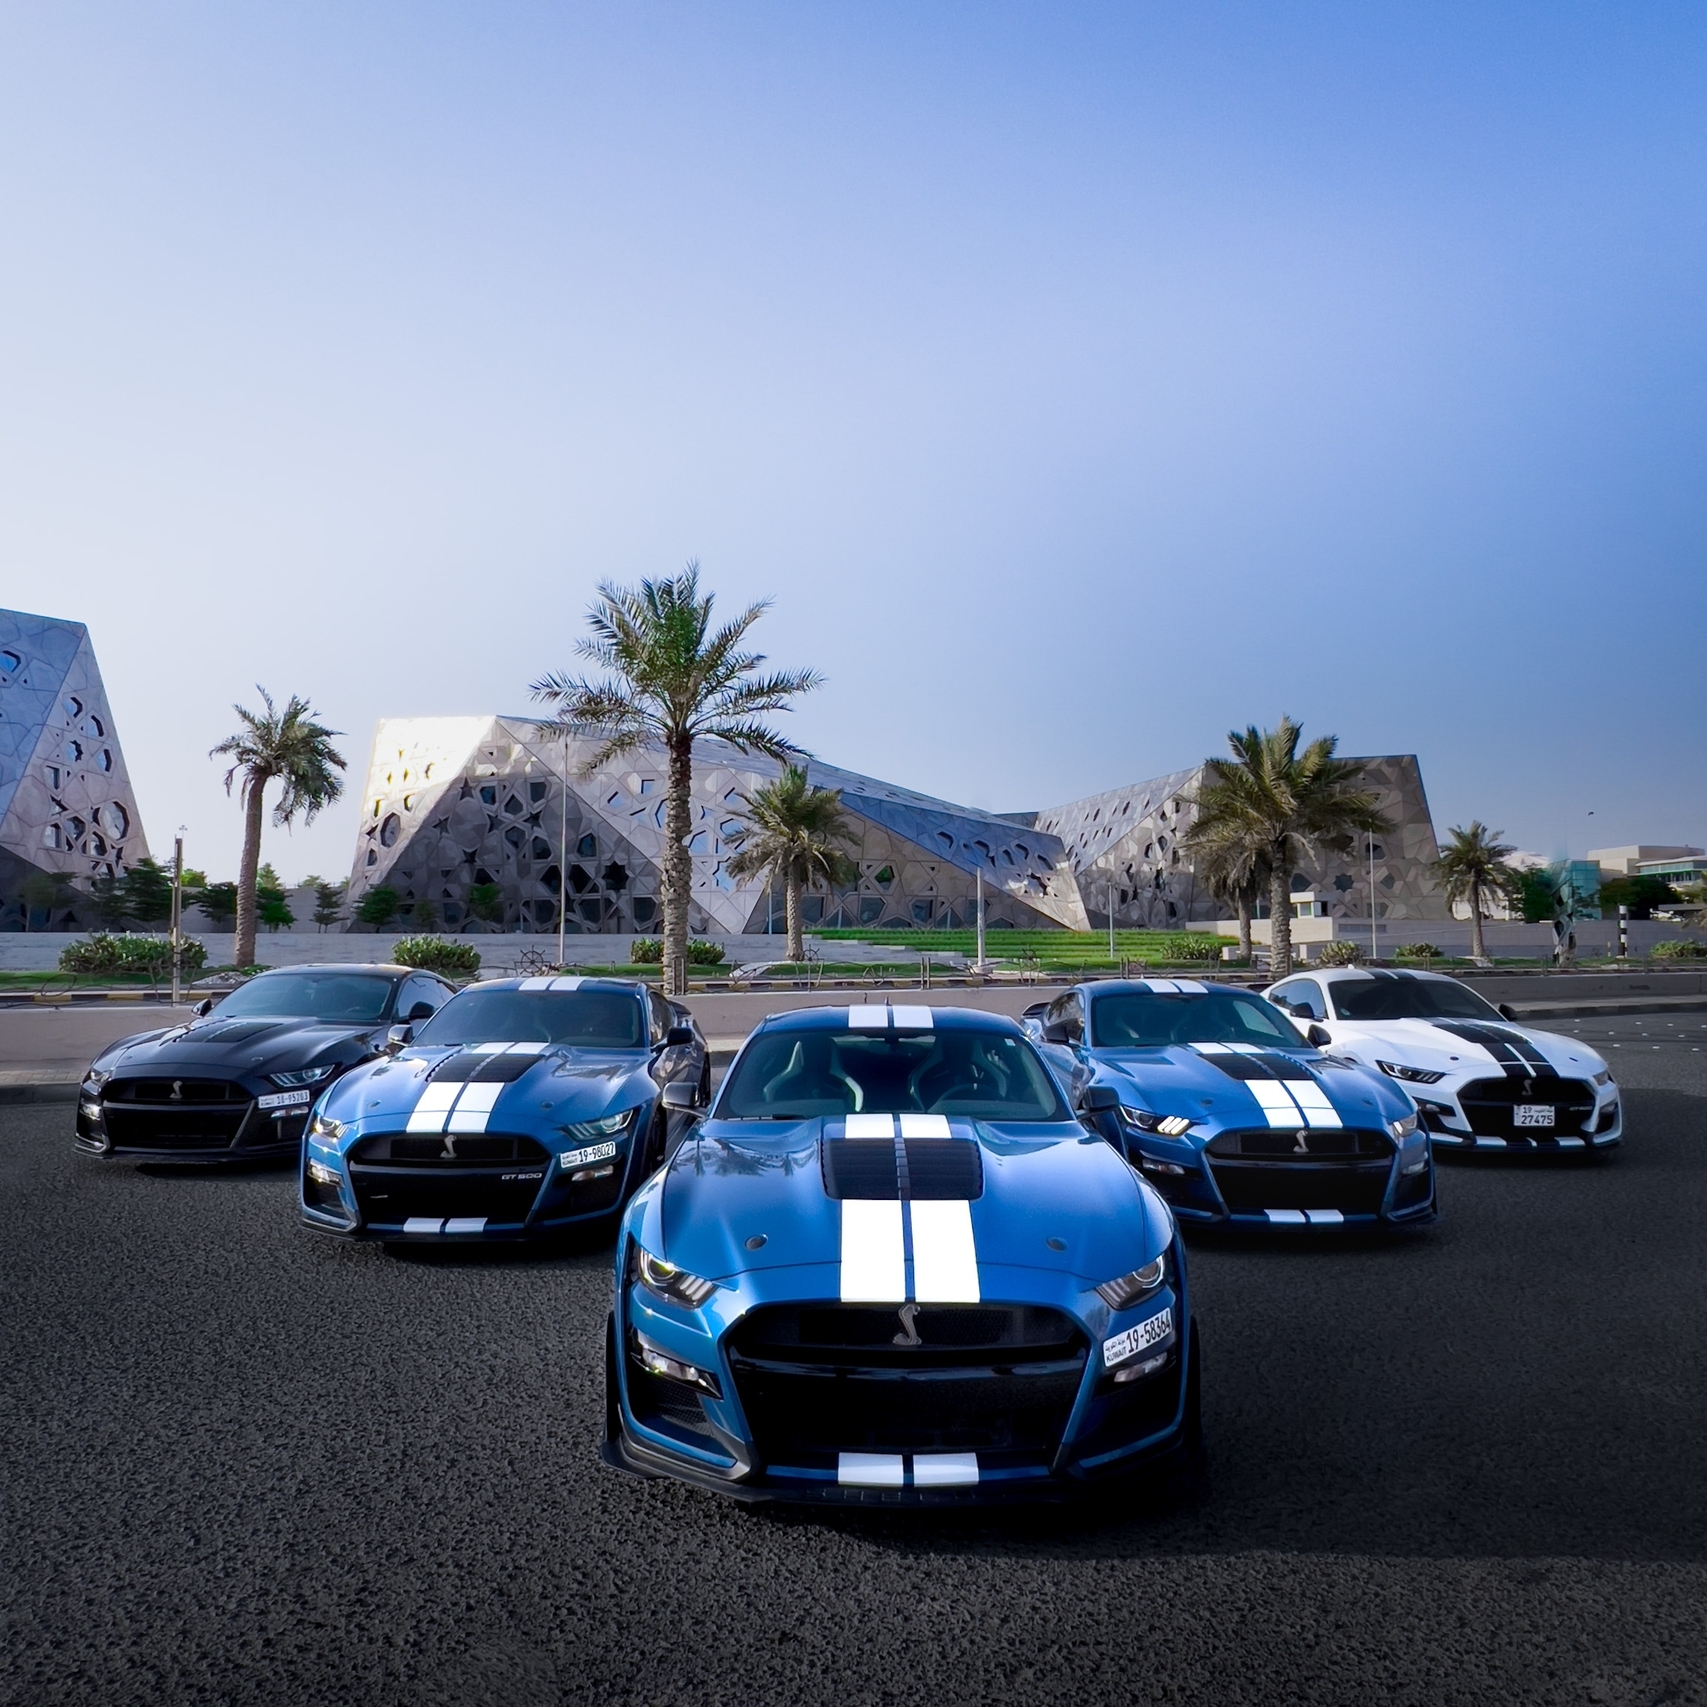 sporting cars in Kuwait City.